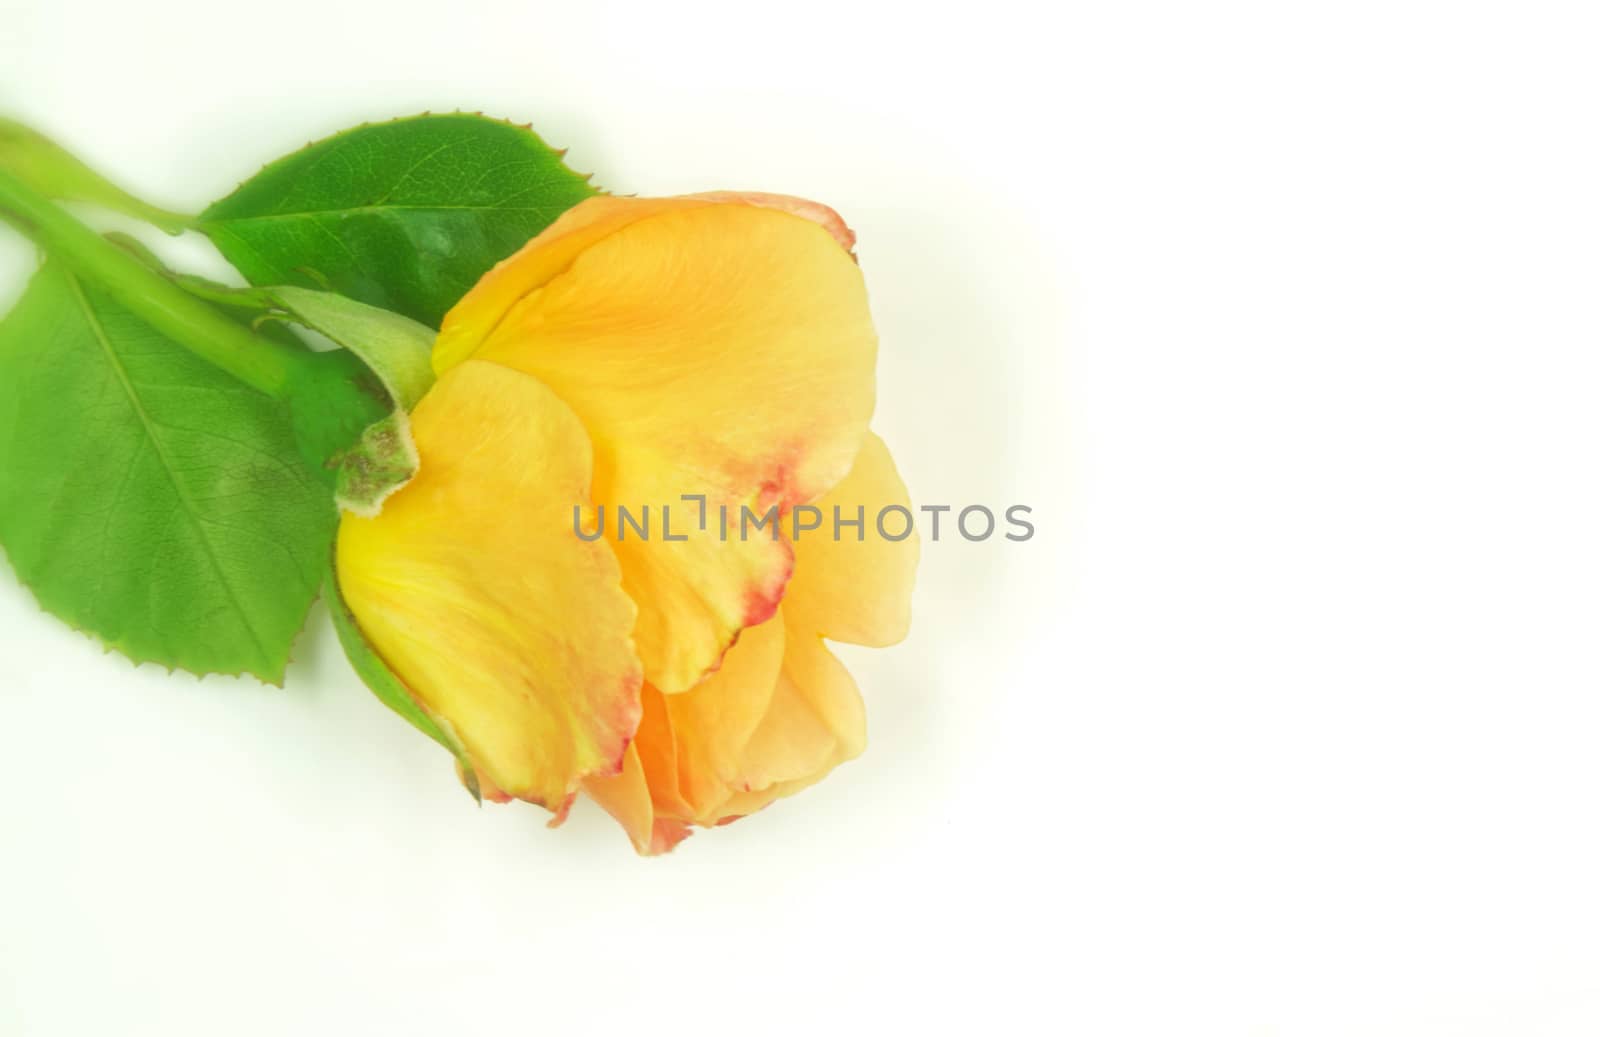 Beautifully presented and photographed flower portraits in close up against a white background..